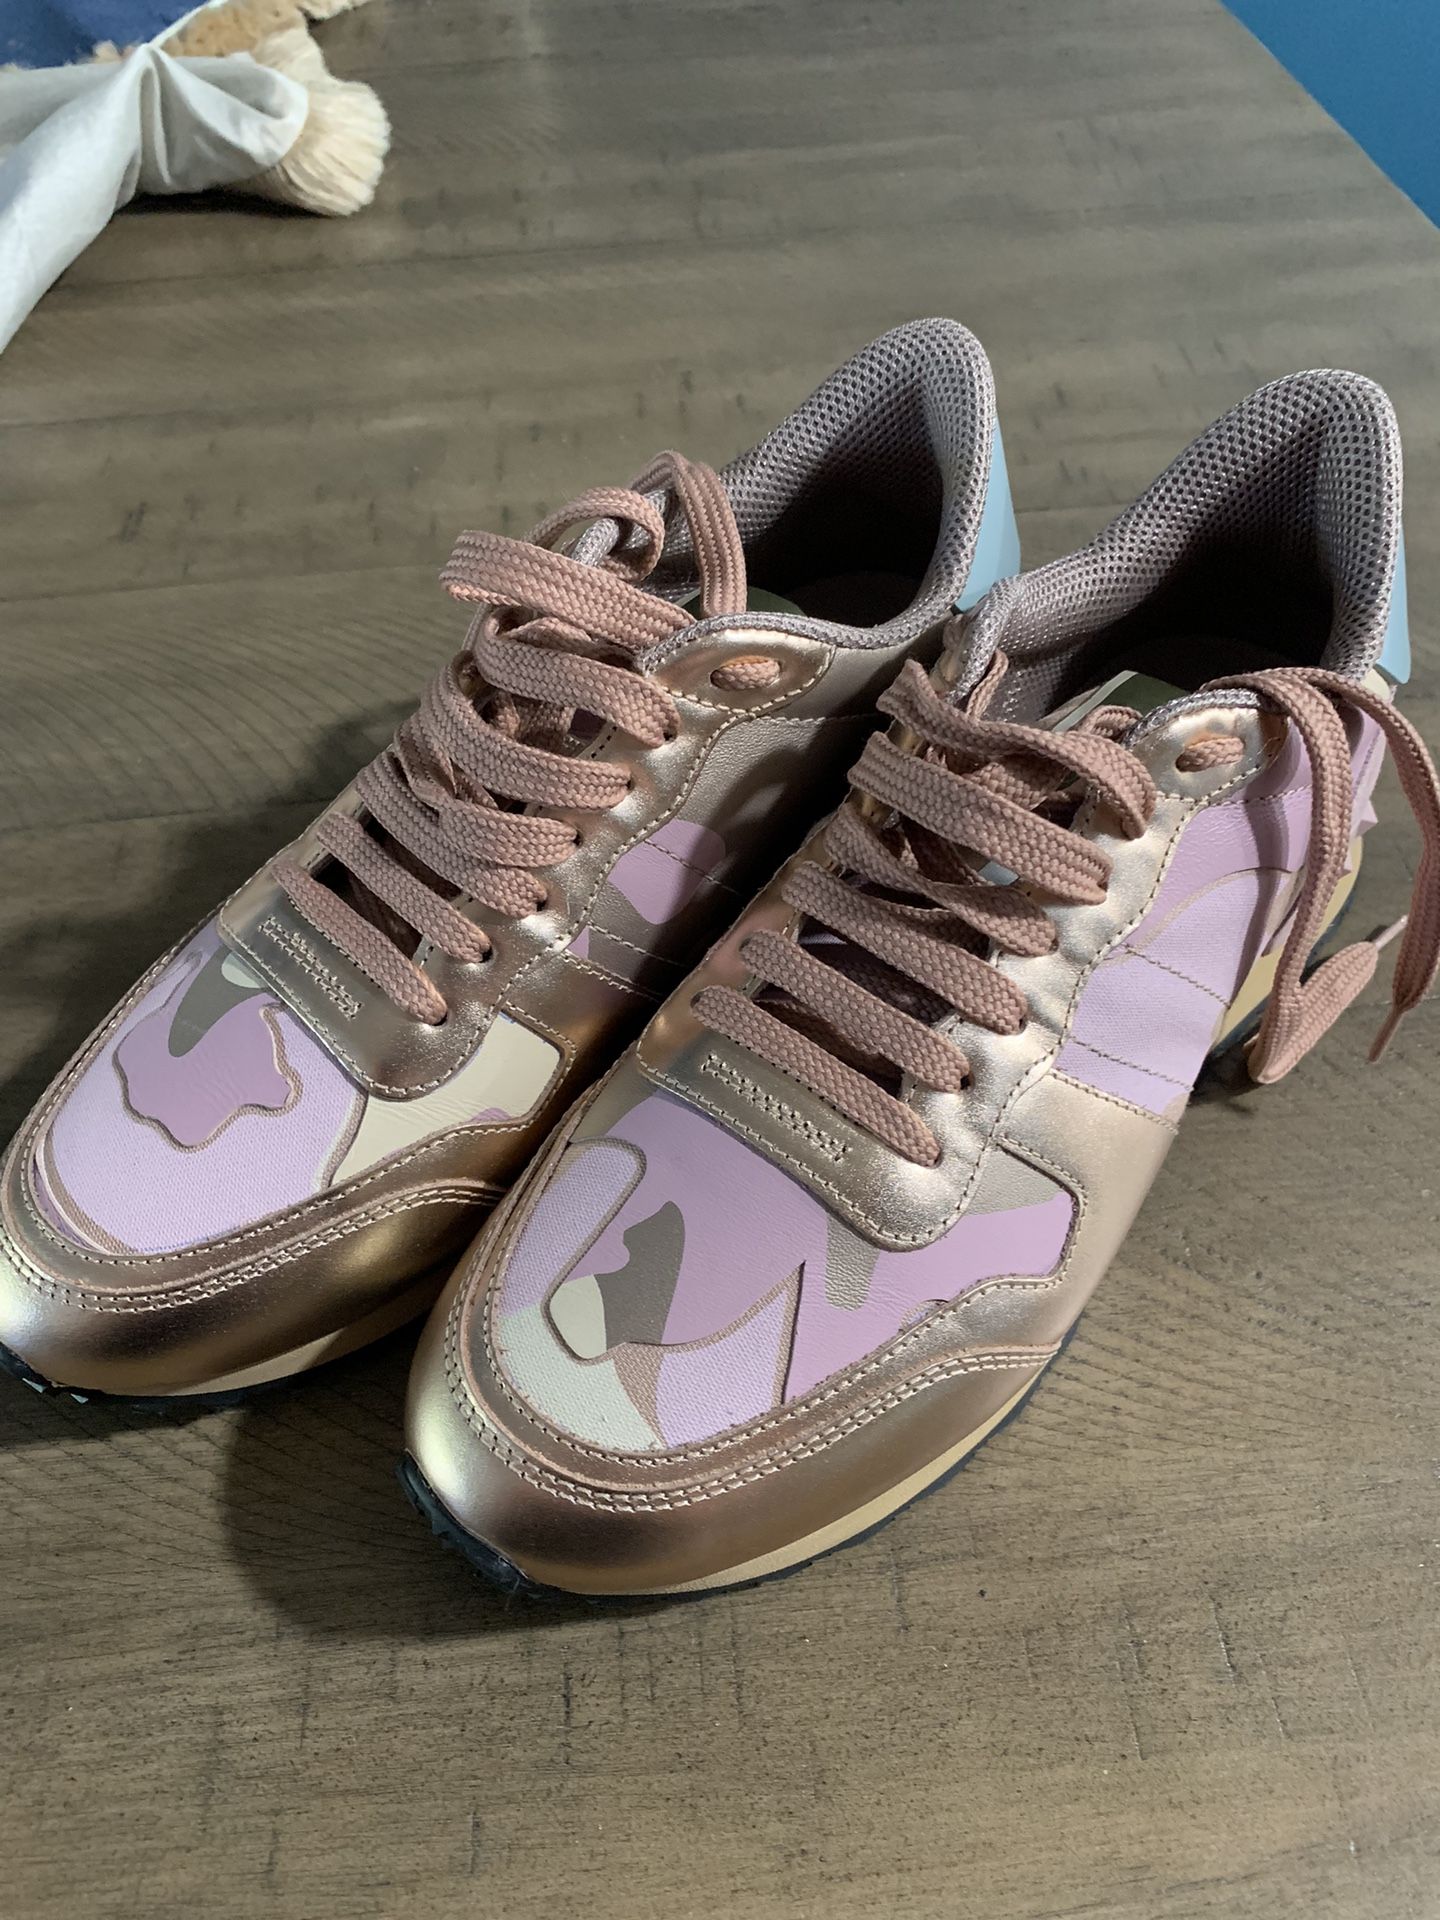 New Authentic Rockstud Valentino Sneaker Size 8 for Sale in Los Angeles, - OfferUp